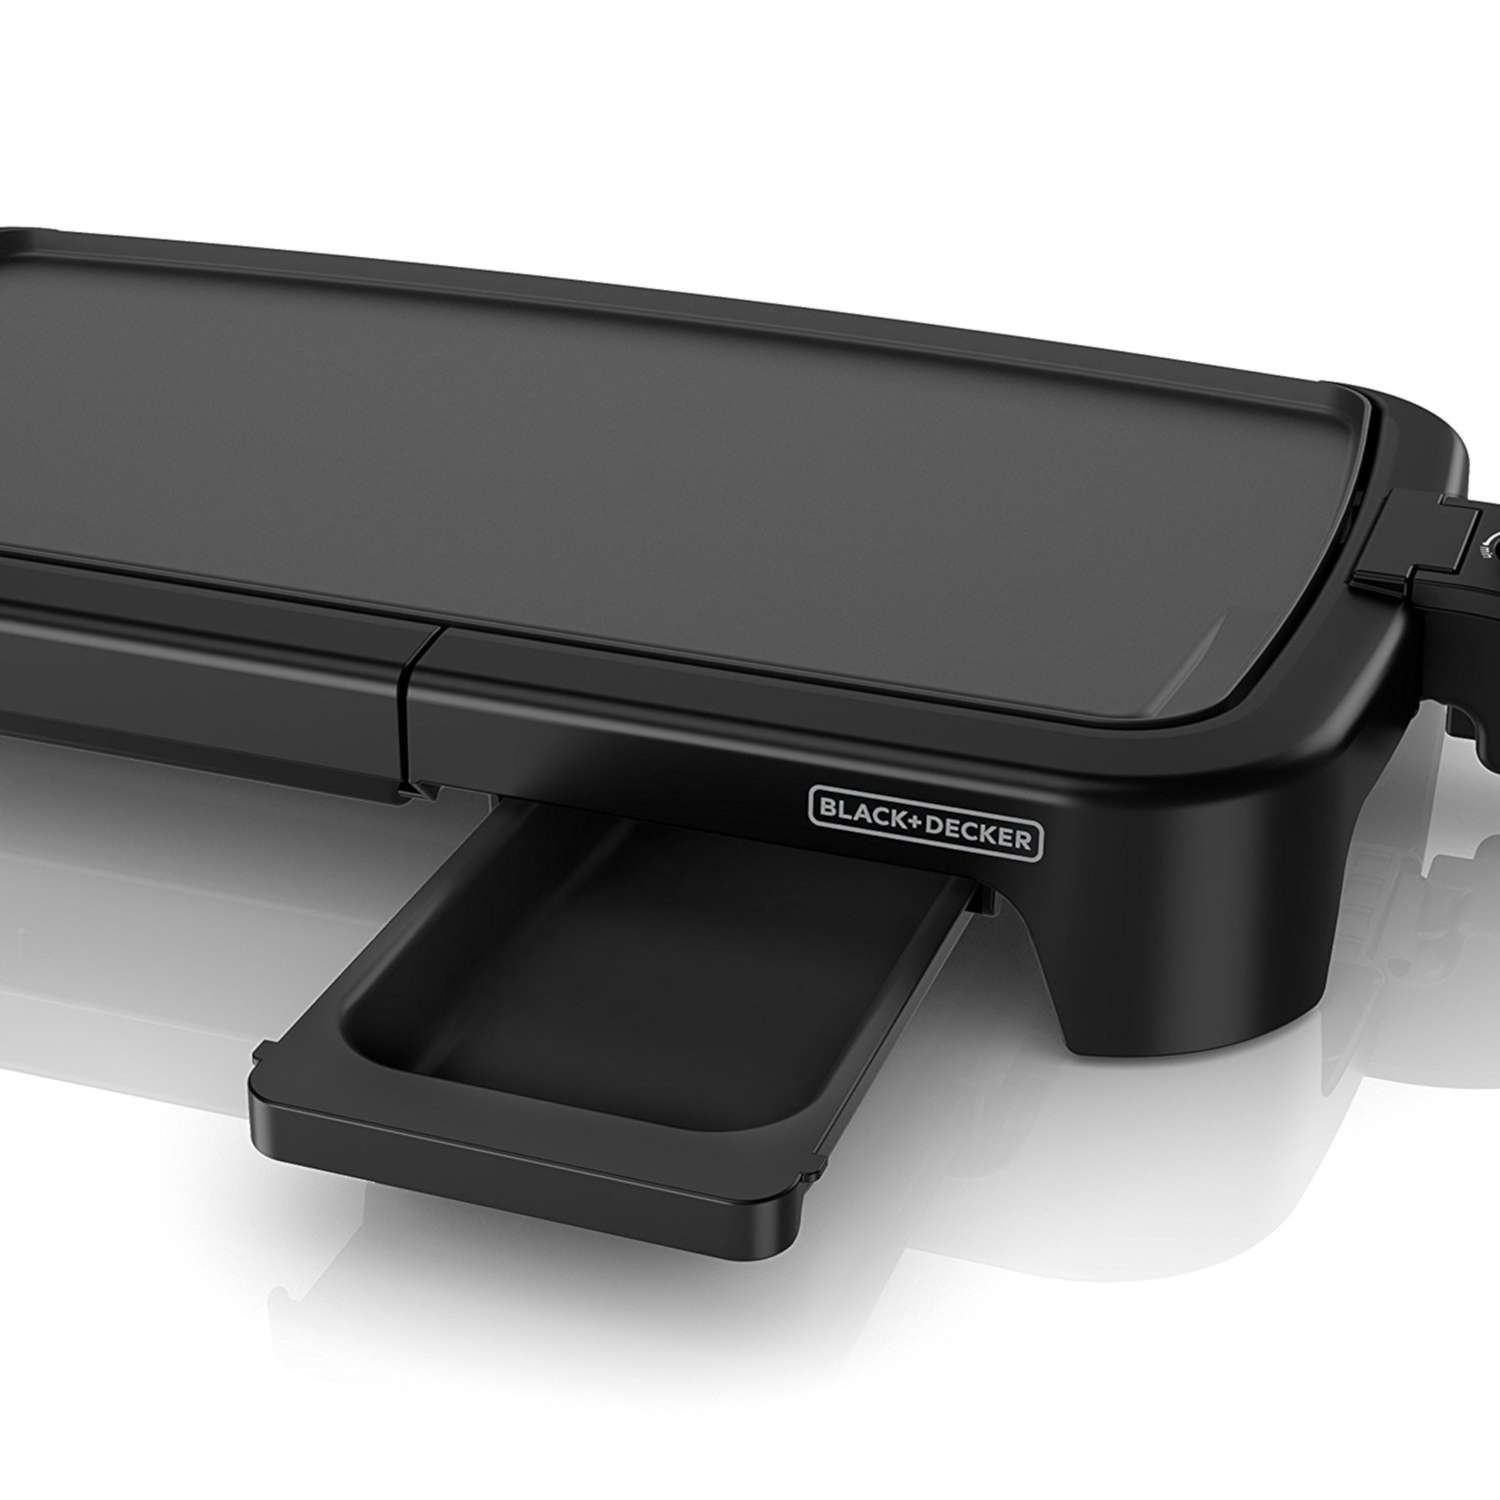 BLACK+DECKER Family Sized Electric Griddle with Warming Tray & Drip Tray  Review 